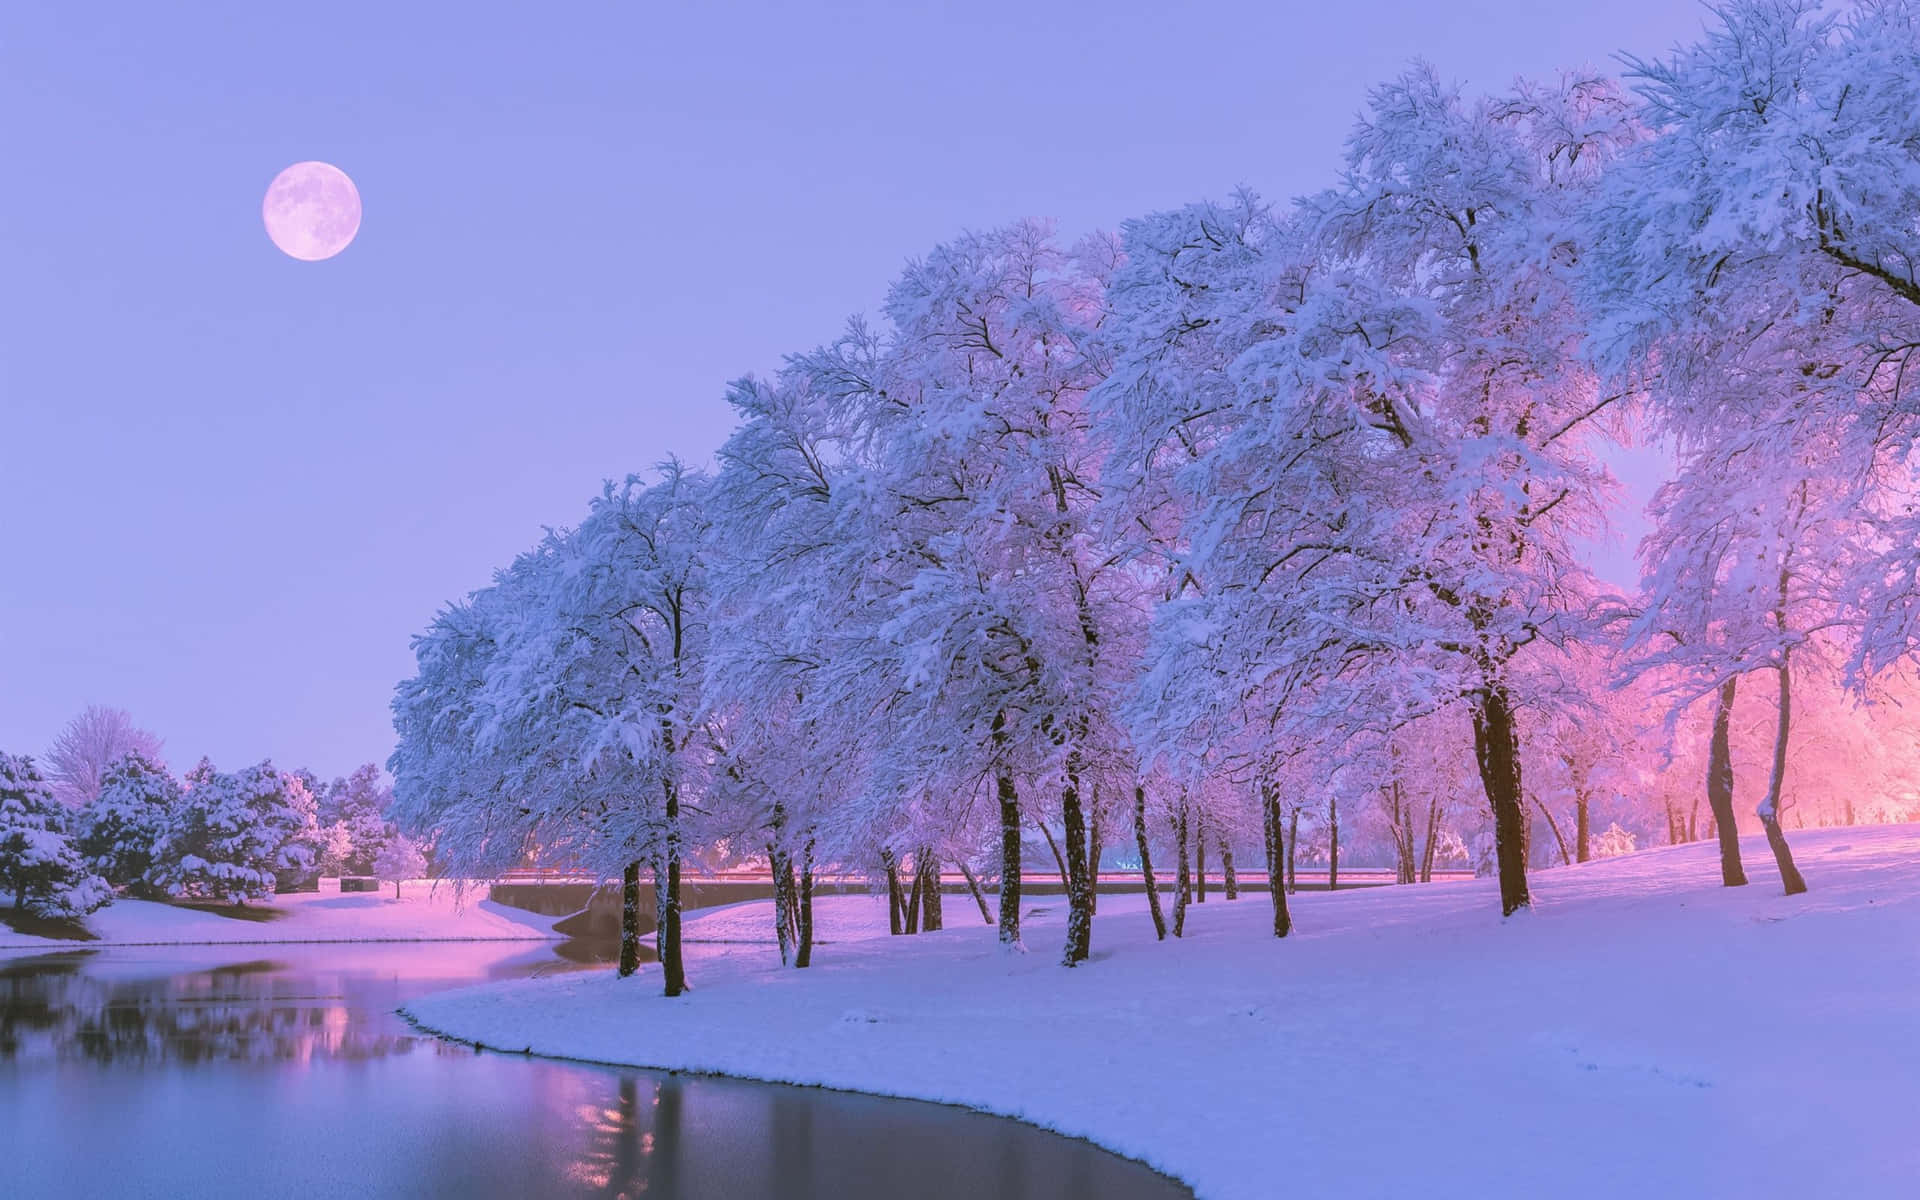 "Vibrant pink trees in a surreal landscape" Wallpaper